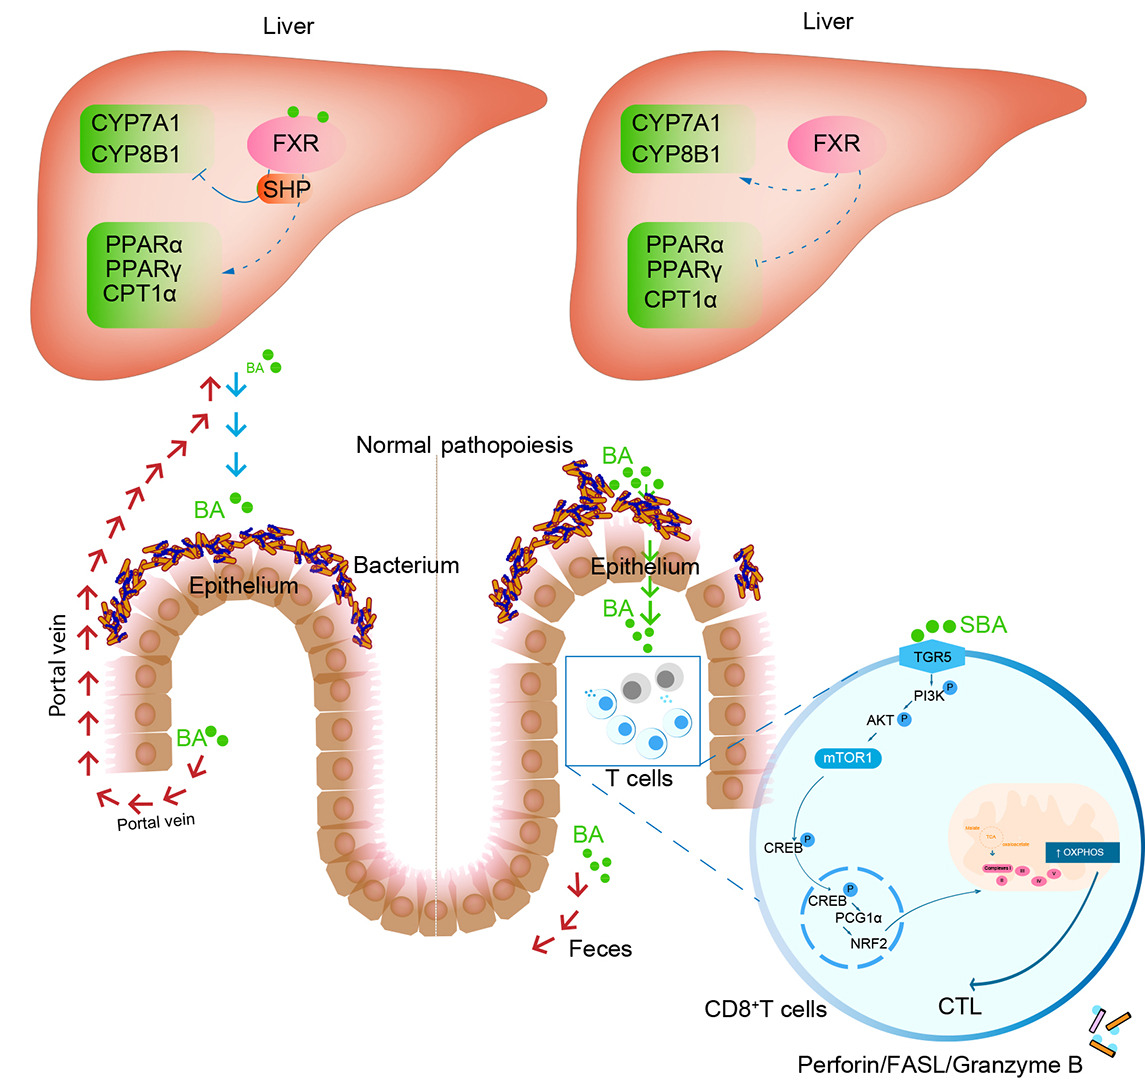 Ileitis promotes MASLD progression via bile acid modulation and enhanced TGR5 signaling in ileal CD8+ T cells

Full text here👉journal-of-hepatology.eu/article/S0168-…

#LiverTwitter